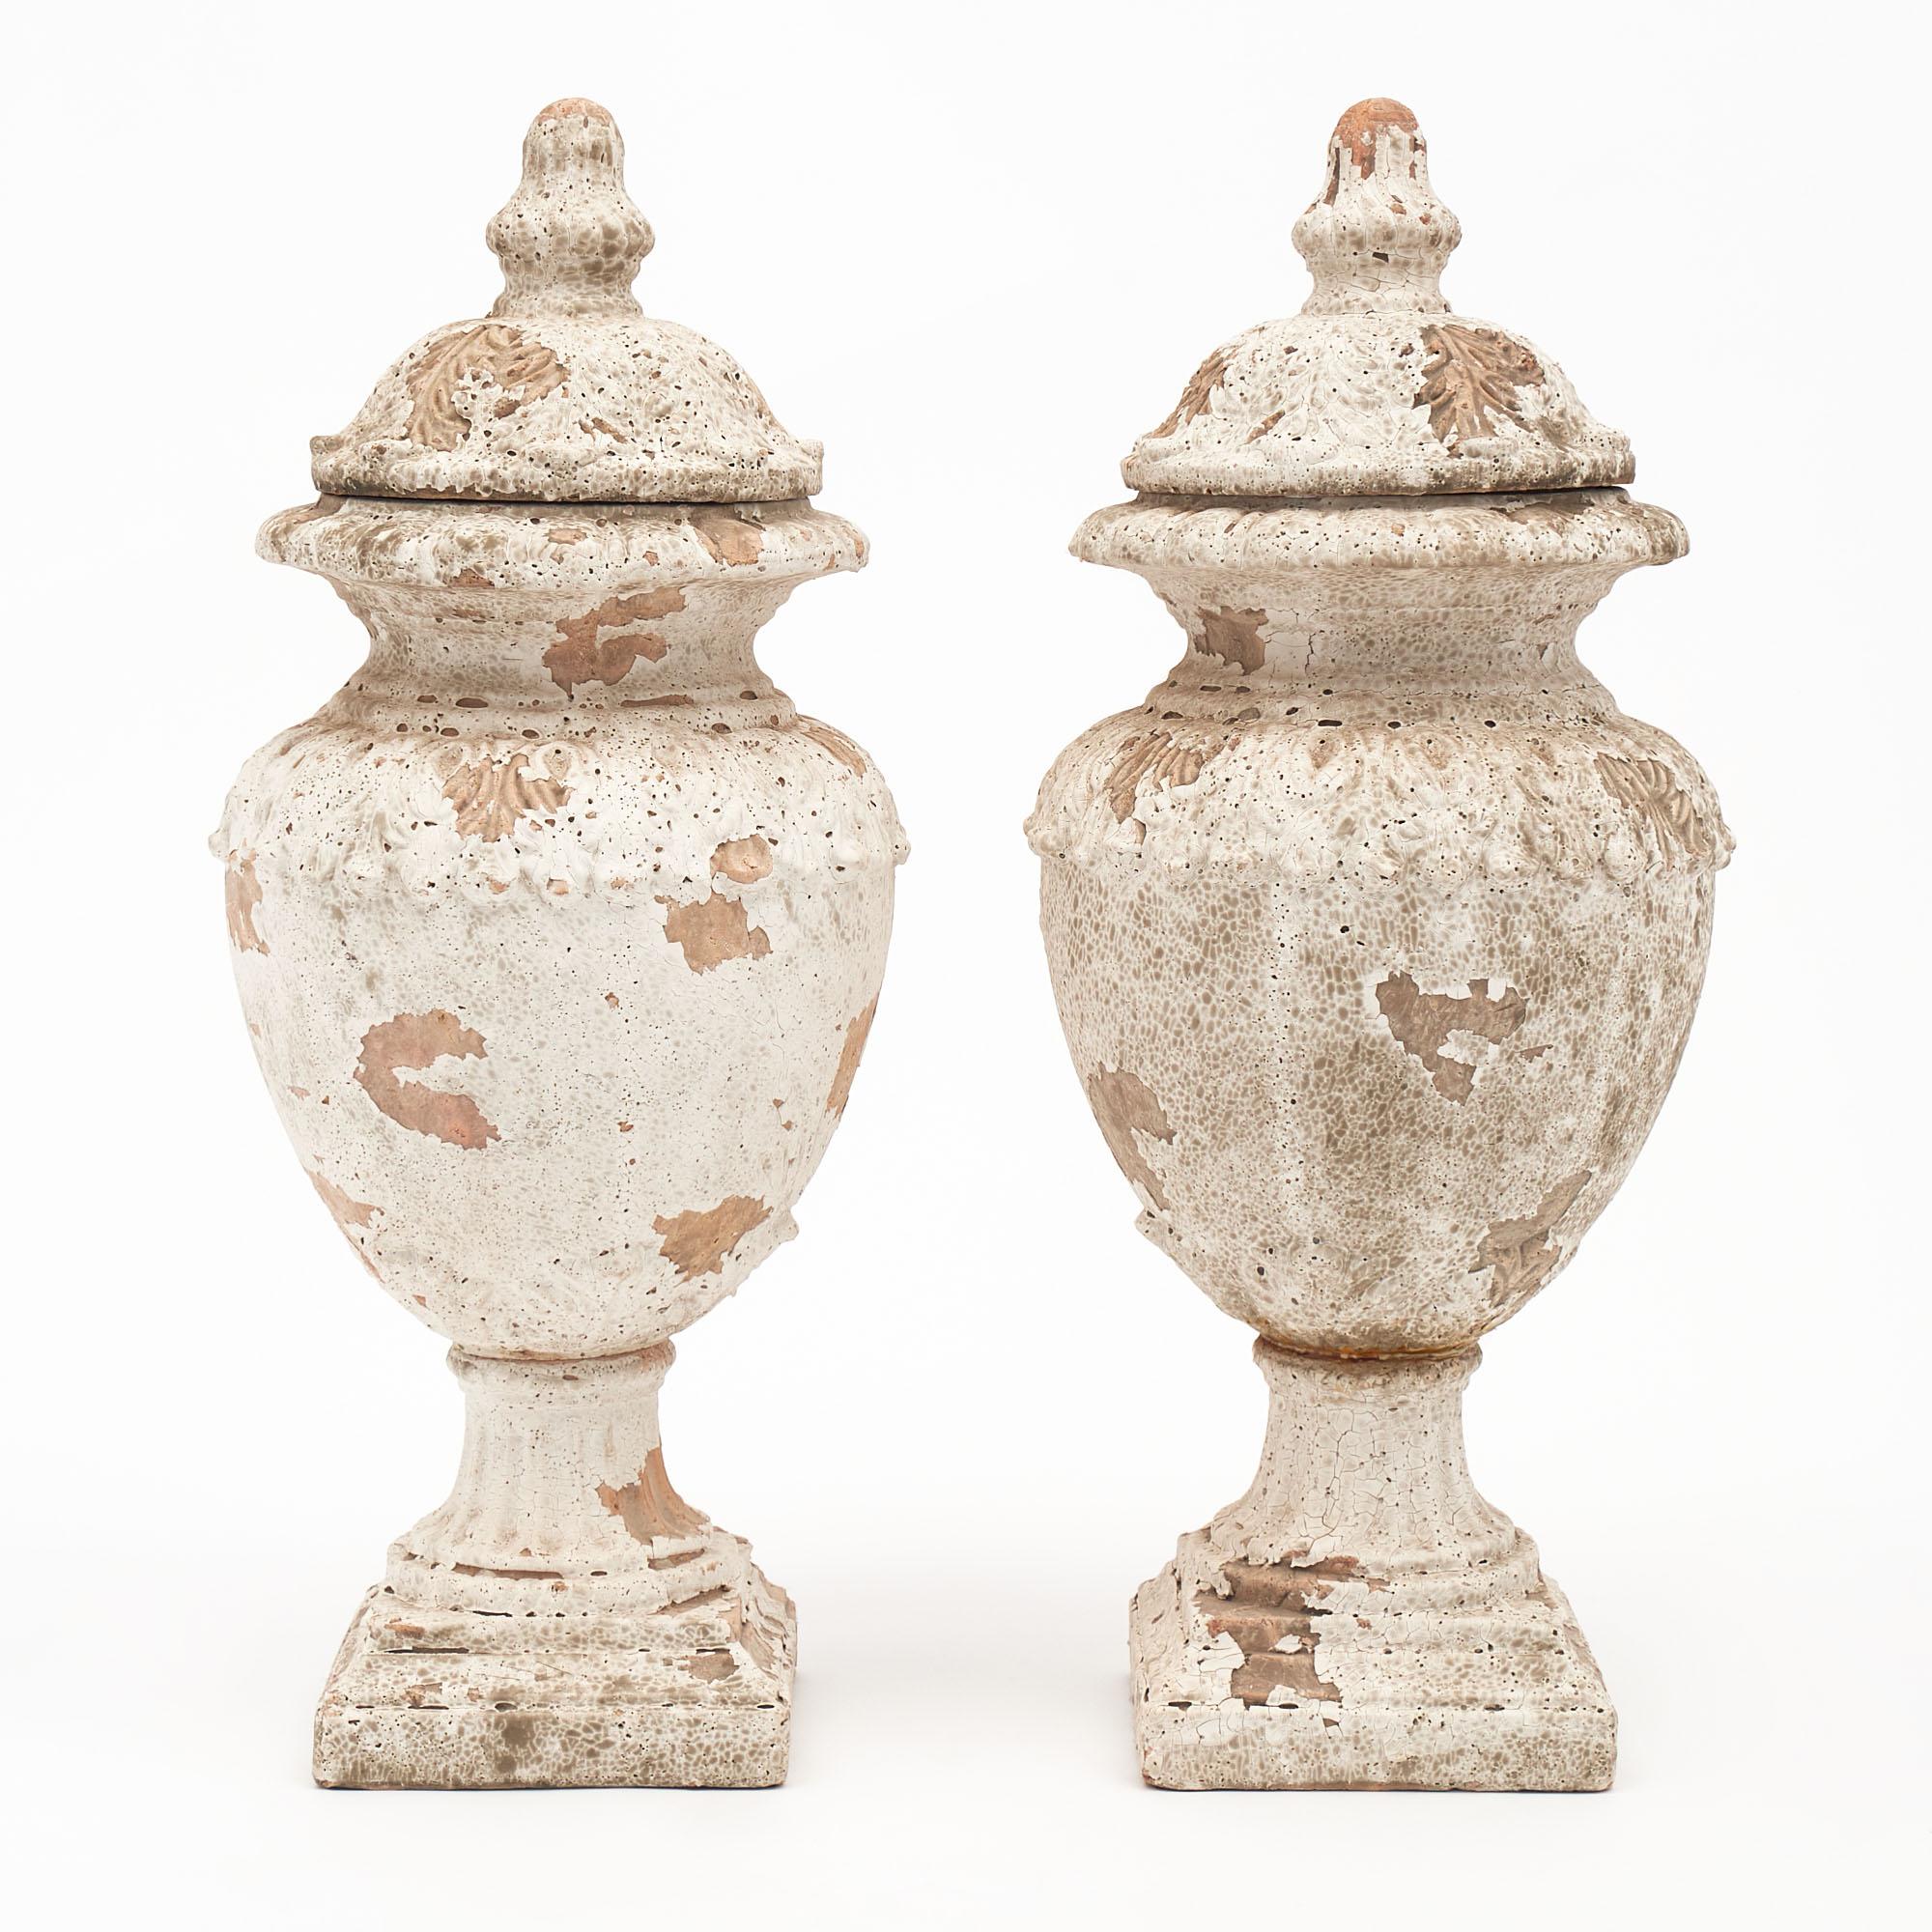 Pair of urns from France in the Renaissance style. They are made of terra-cotta and have a white plaster paint. The patina is all original.